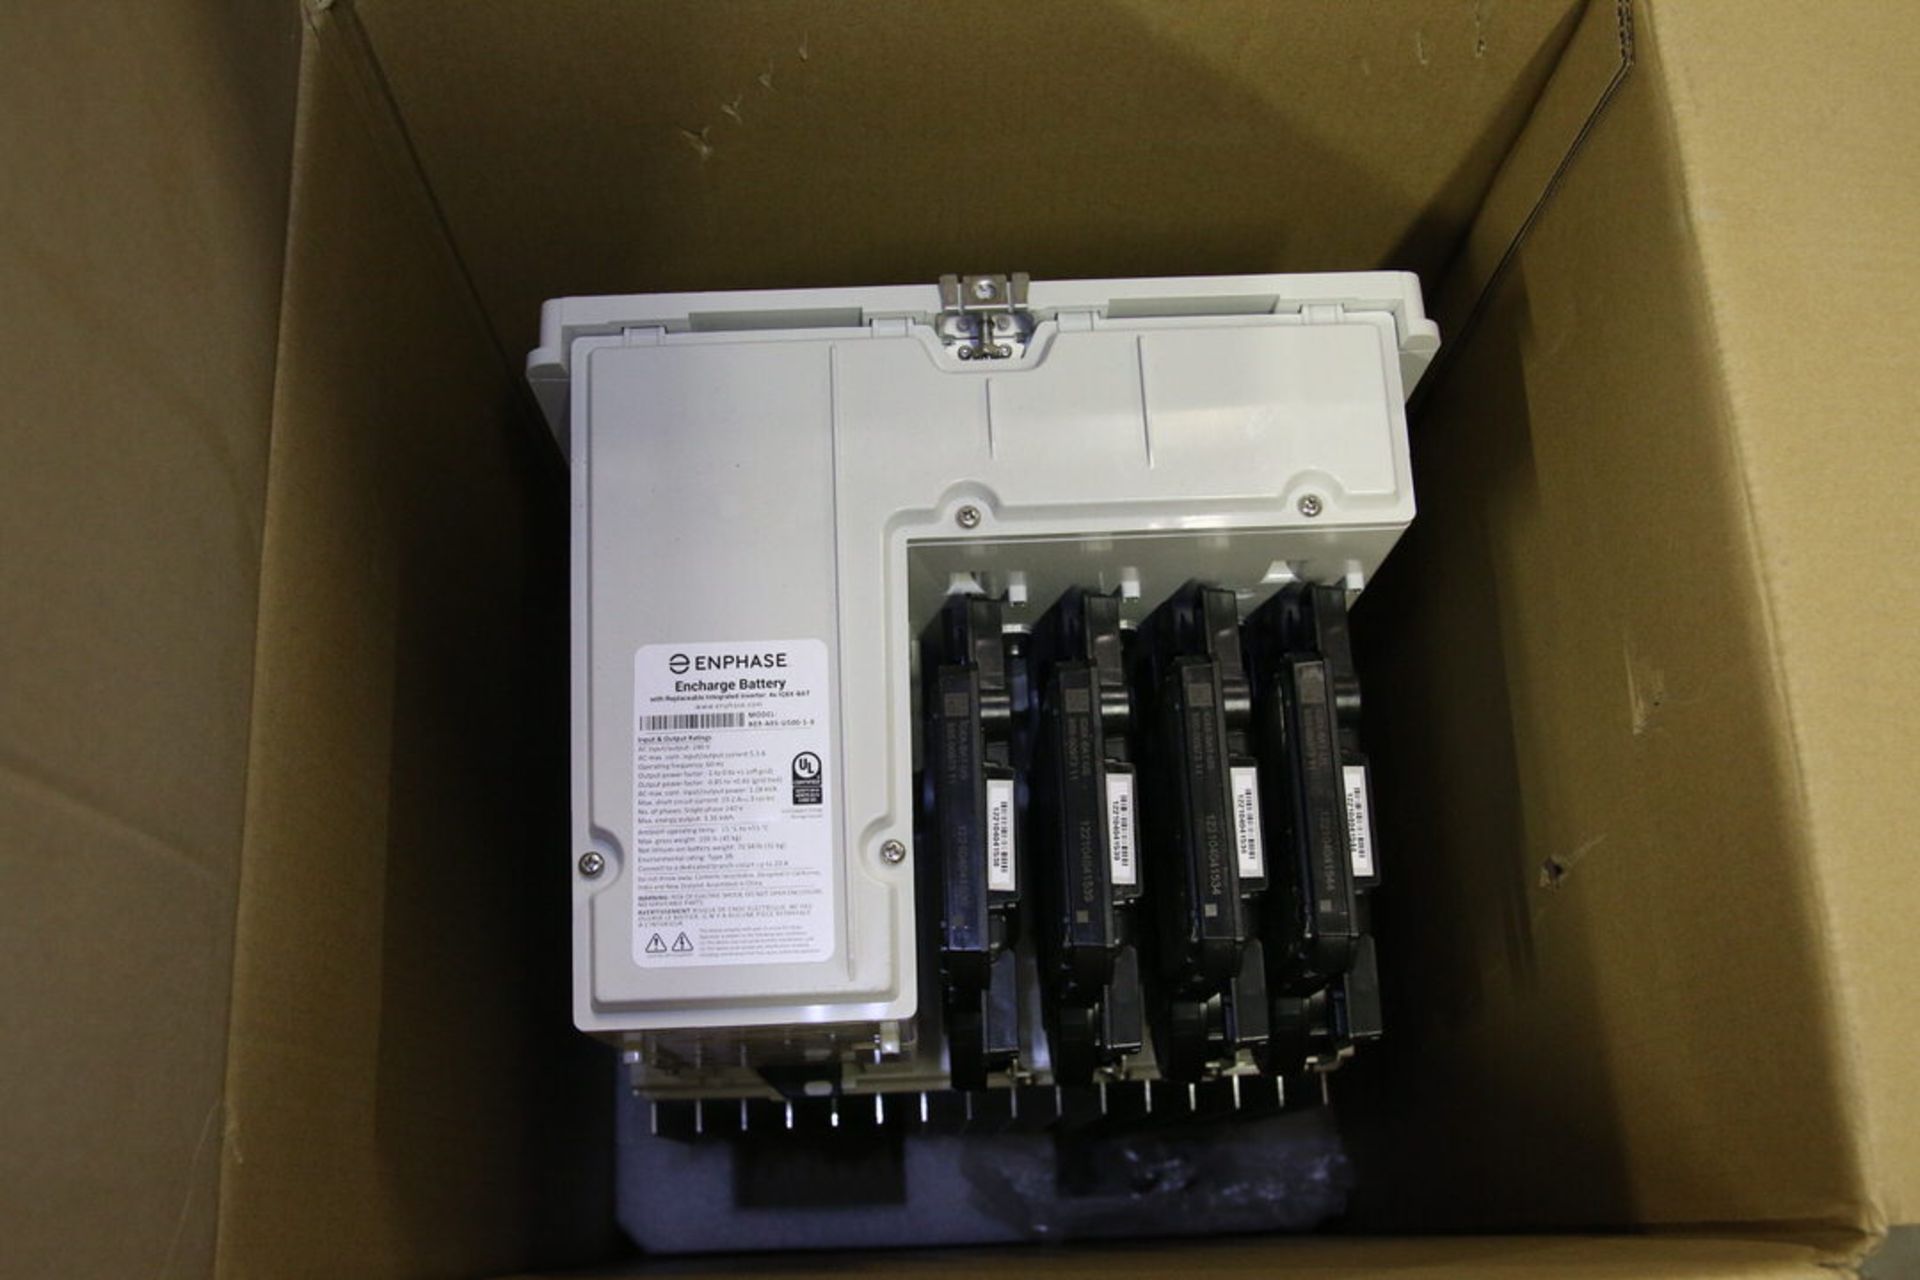 Enphase Encharge Battery with Replaceable Integrated Inverter - Image 2 of 3